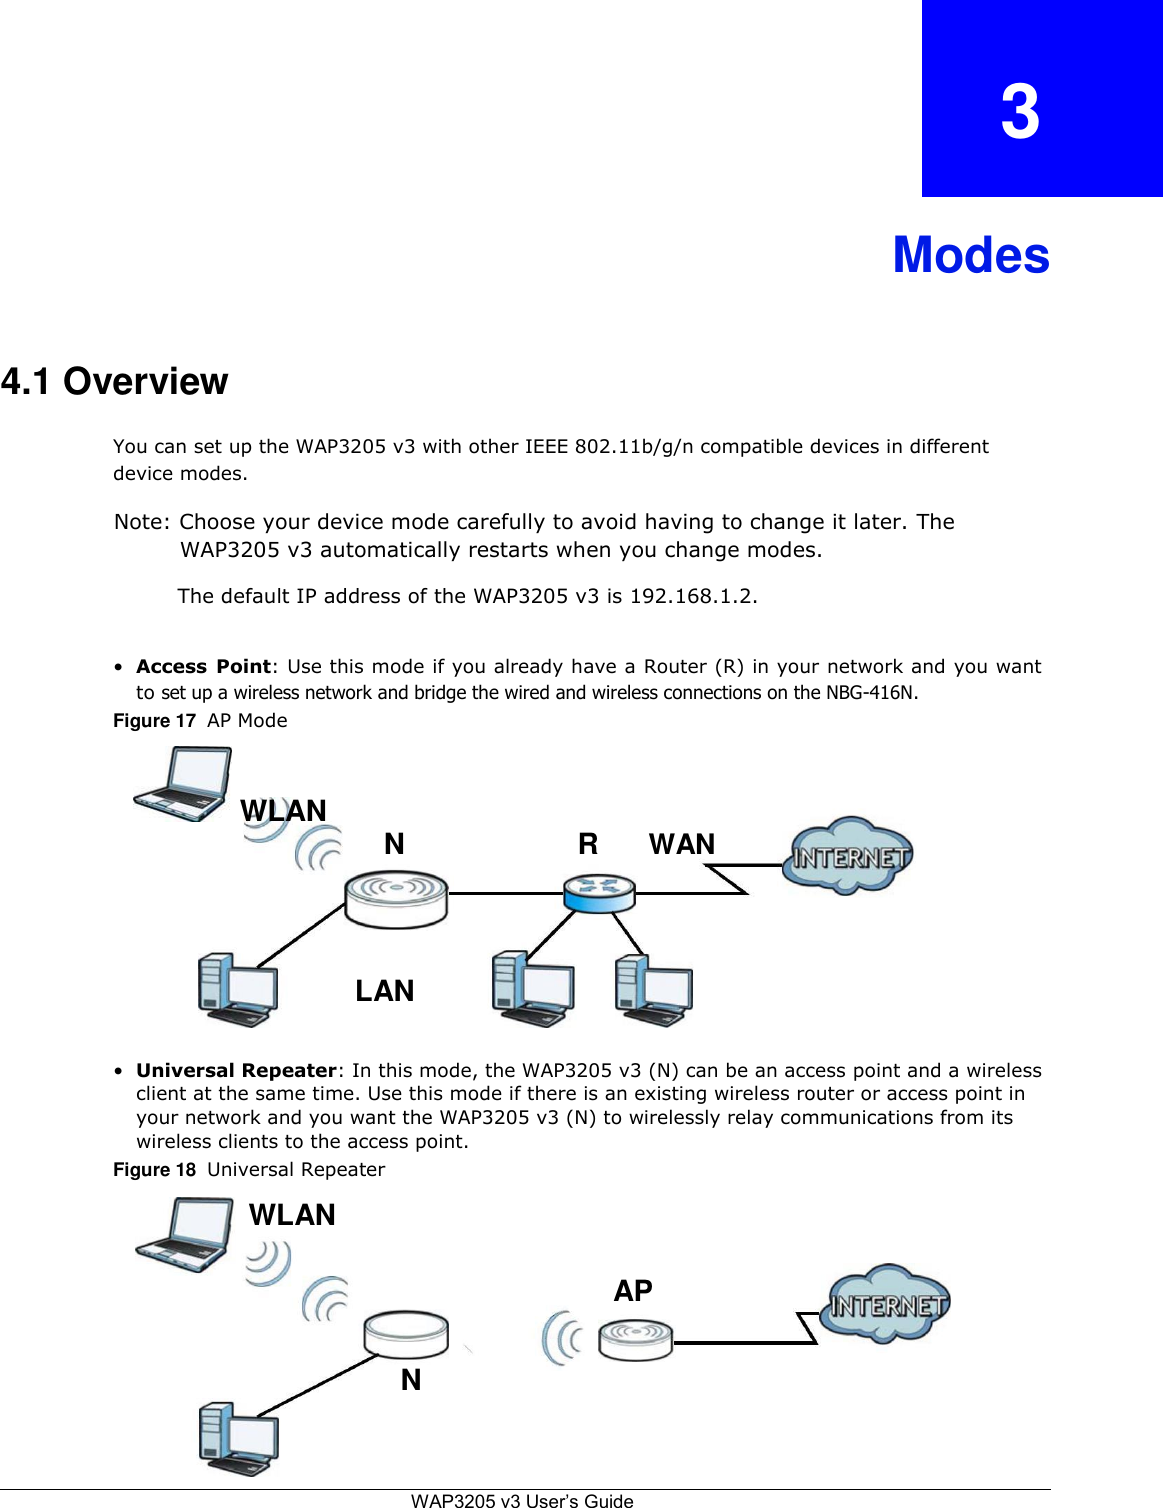 3    Modes    4.1 Overview  You can set up the WAP3205 v3 with other IEEE 802.11b/g/n compatible devices in different device modes.  Note: Choose your device mode carefully to avoid having to change it later. The WAP3205 v3 automatically restarts when you change modes.  The default IP address of the WAP3205 v3 is 192.168.1.2.   • Access  Point: Use this mode if you already have a Router (R) in your network and you want to set up a wireless network and bridge the wired and wireless connections on the NBG-416N.  Figure 17  AP Mode   WLAN N R WAN      LAN   • Universal Repeater: In this mode, the WAP3205 v3 (N) can be an access point and a wireless client at the same time. Use this mode if there is an existing wireless router or access point in your network and you want the WAP3205 v3 (N) to wirelessly relay communications from its wireless clients to the access point.  Figure 18  Universal Repeater  WLAN   AP   N     WAP3205 v3 User’s Guide   